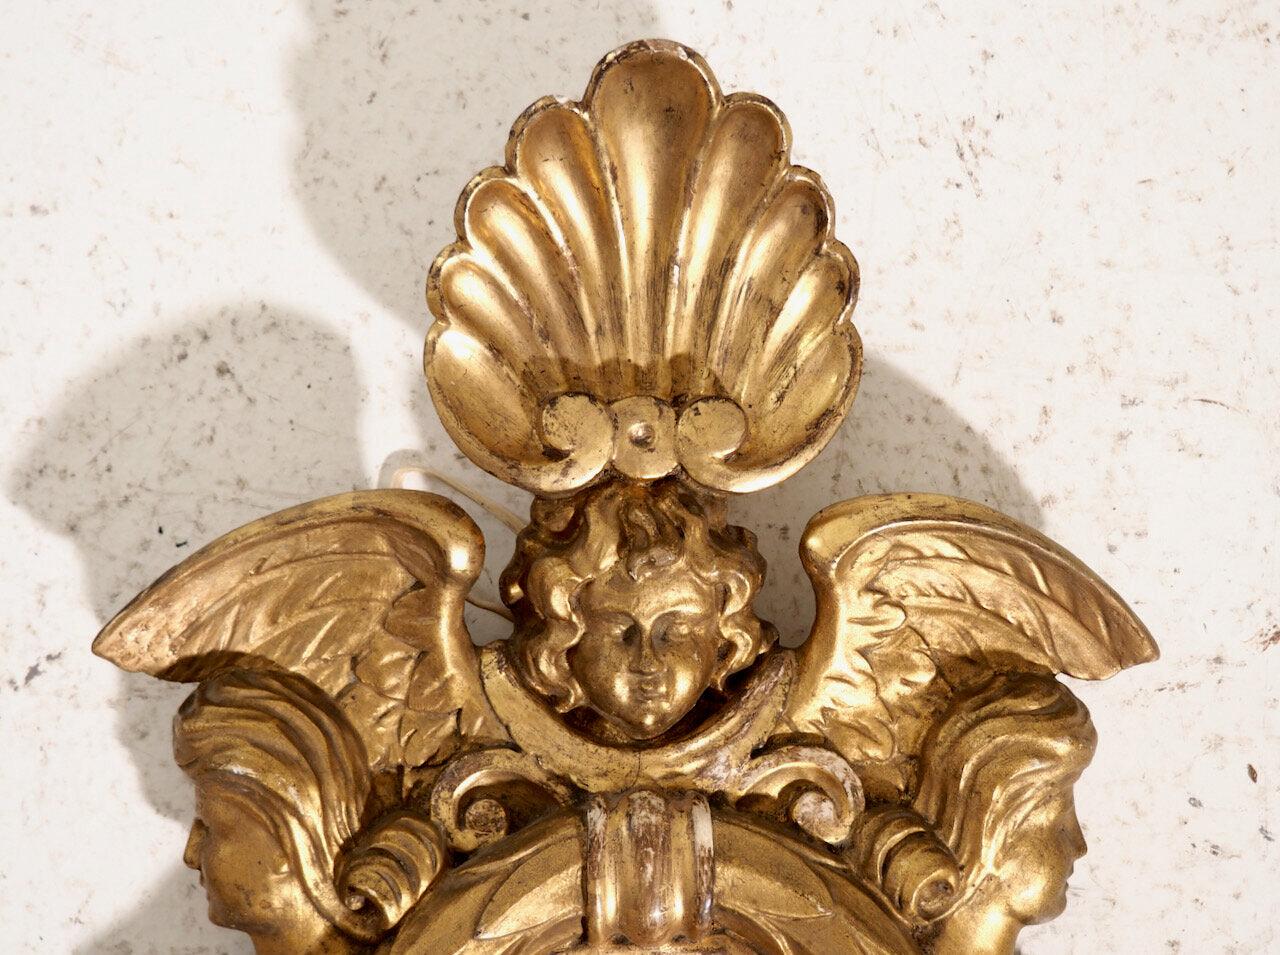 Pair of Swedish sconces, richly carved, 18th century